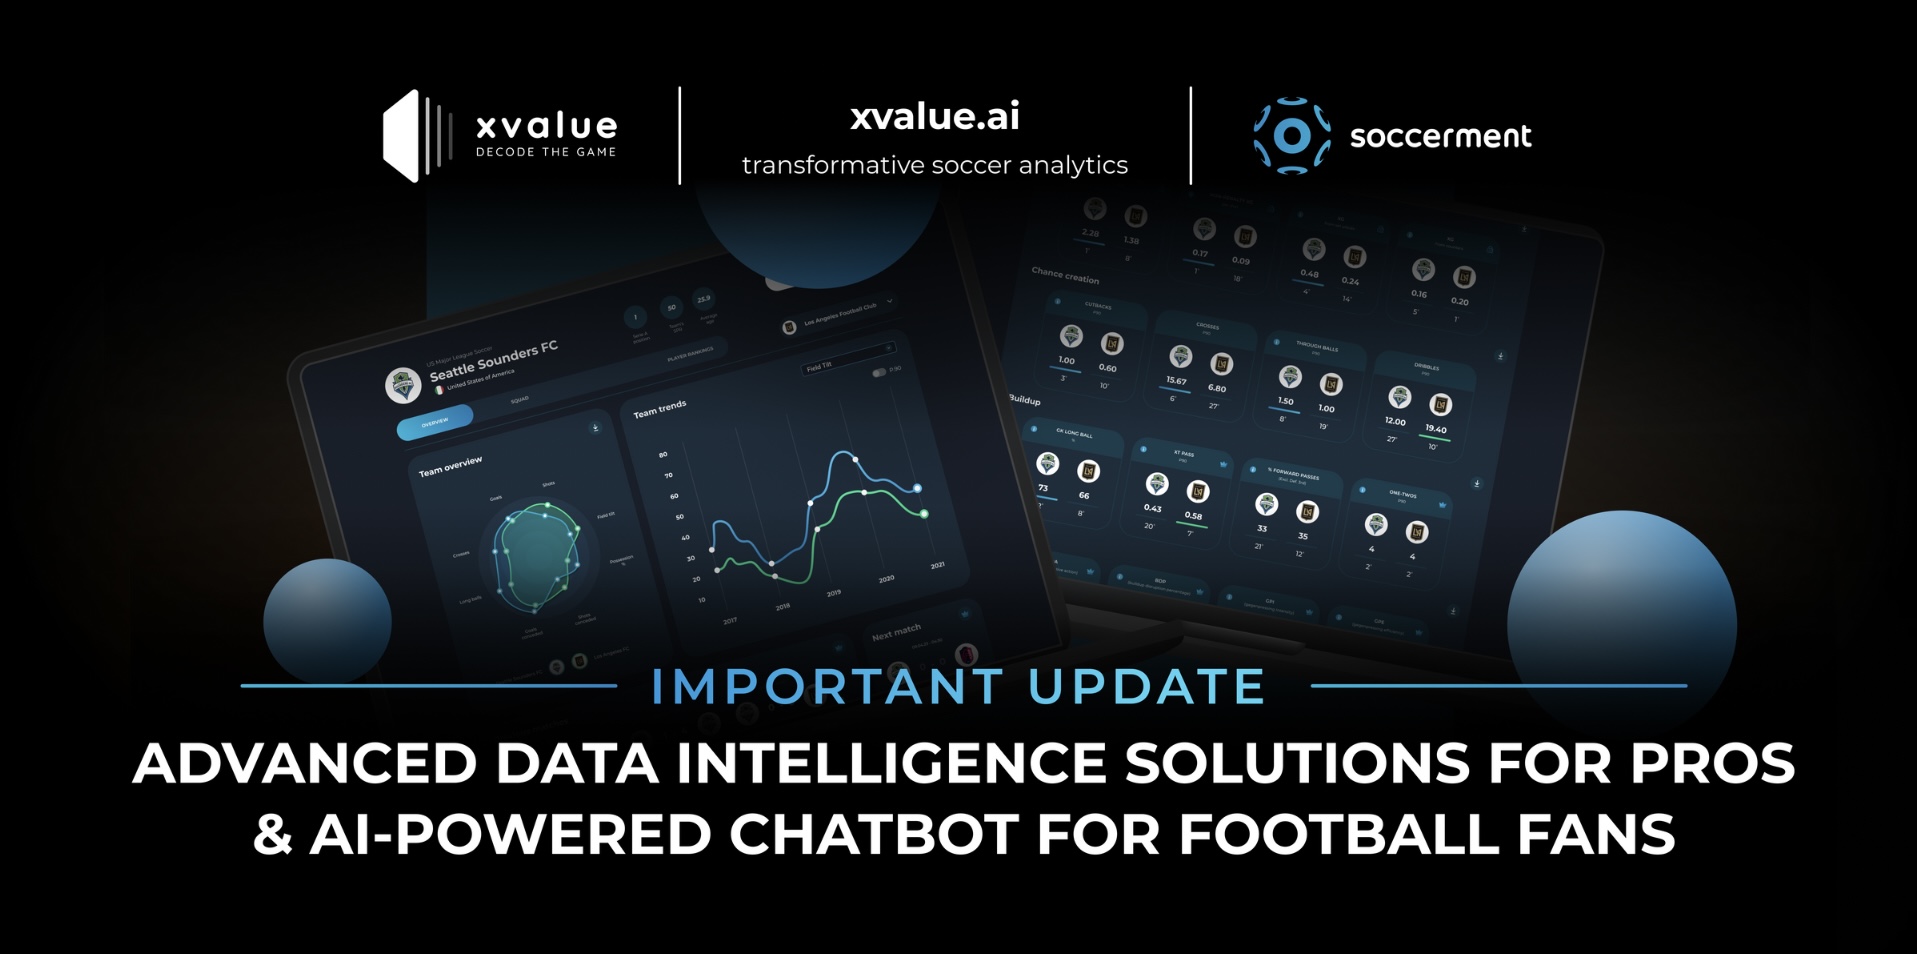 Important Update: New Advanced Data Intelligence Solutions for PROs & AI-Powered Chatbot for Football Fans